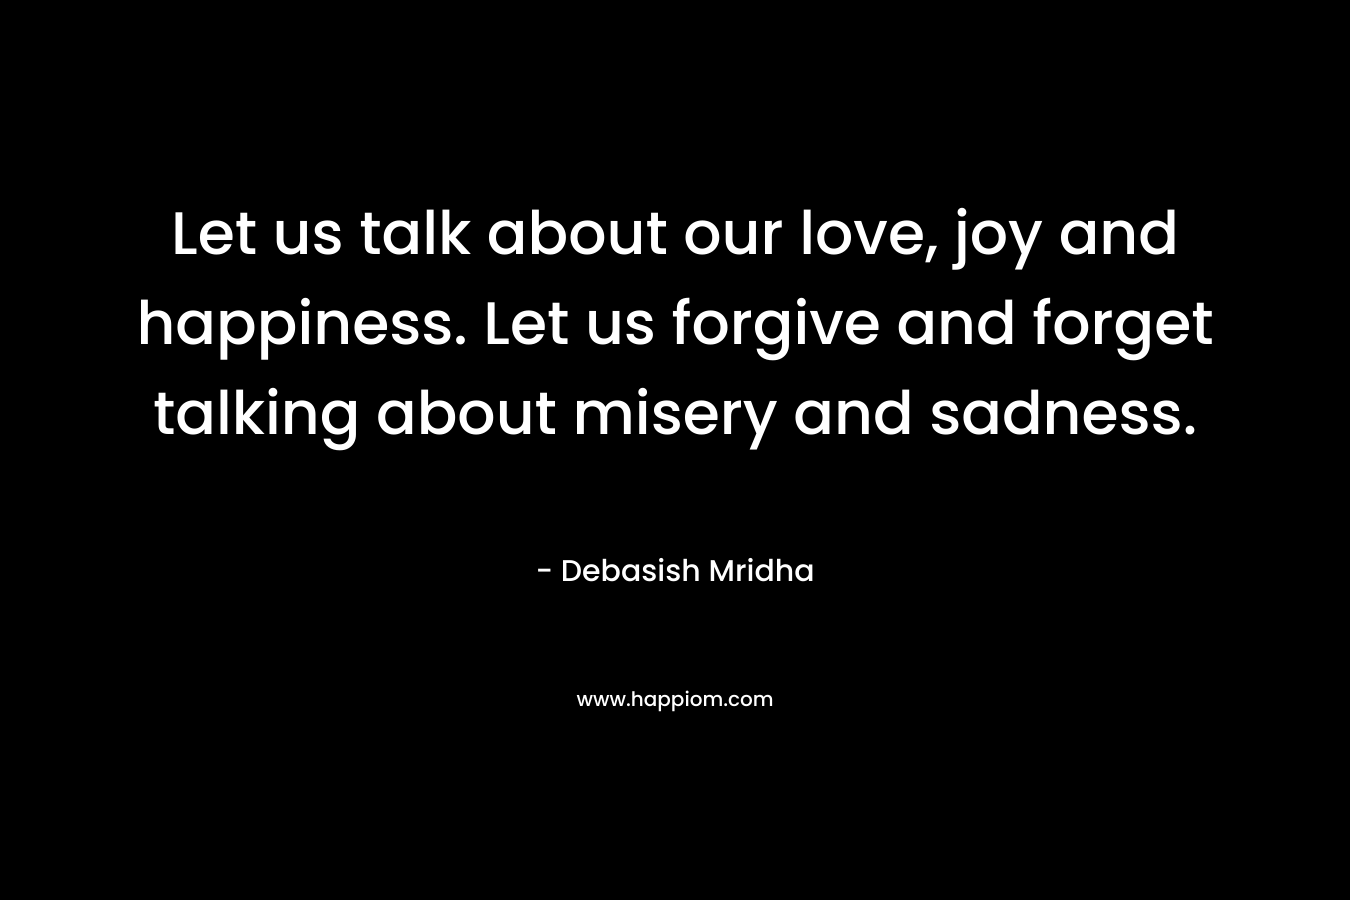 Let us talk about our love, joy and happiness. Let us forgive and forget talking about misery and sadness.